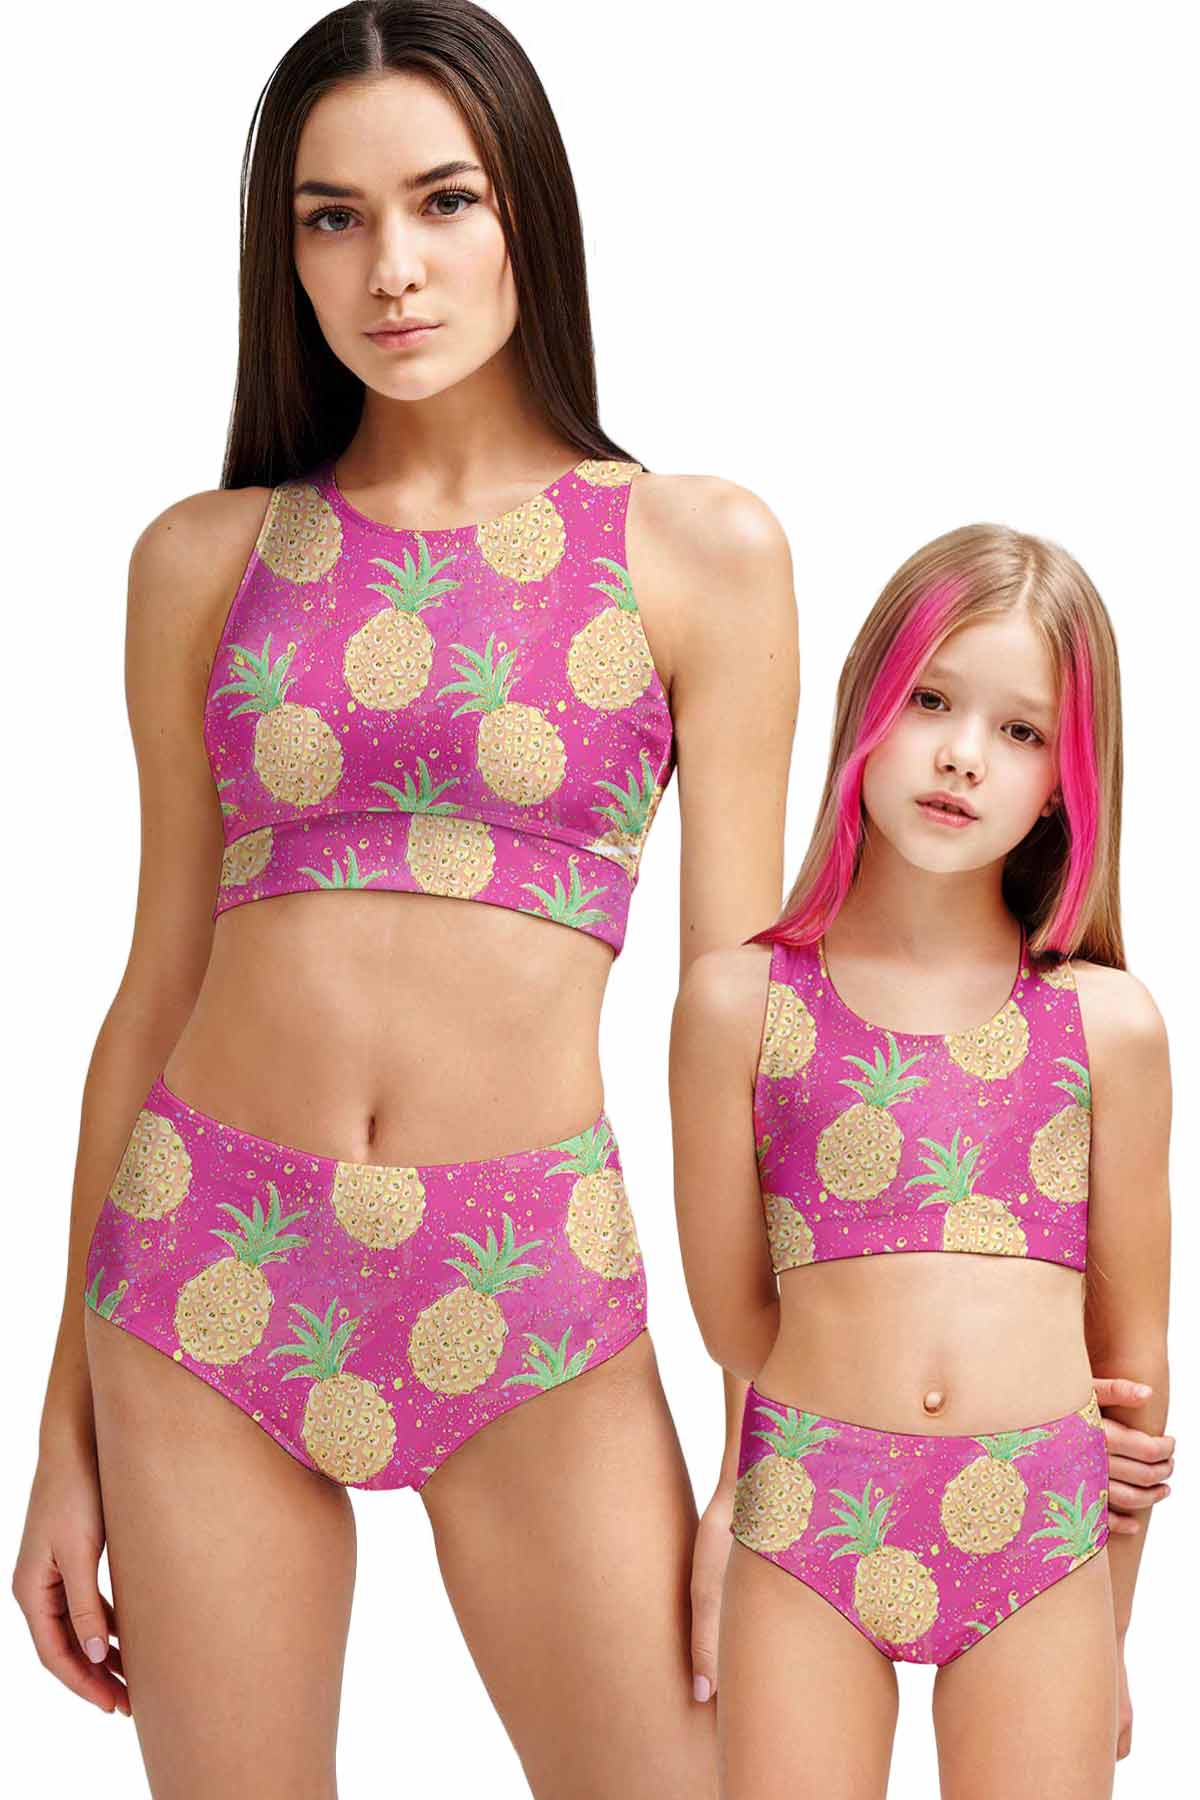 Piña Colada Pink Pineapple Two-Piece Sporty Swimsuits - Mommy and Me - Pineapple Clothing